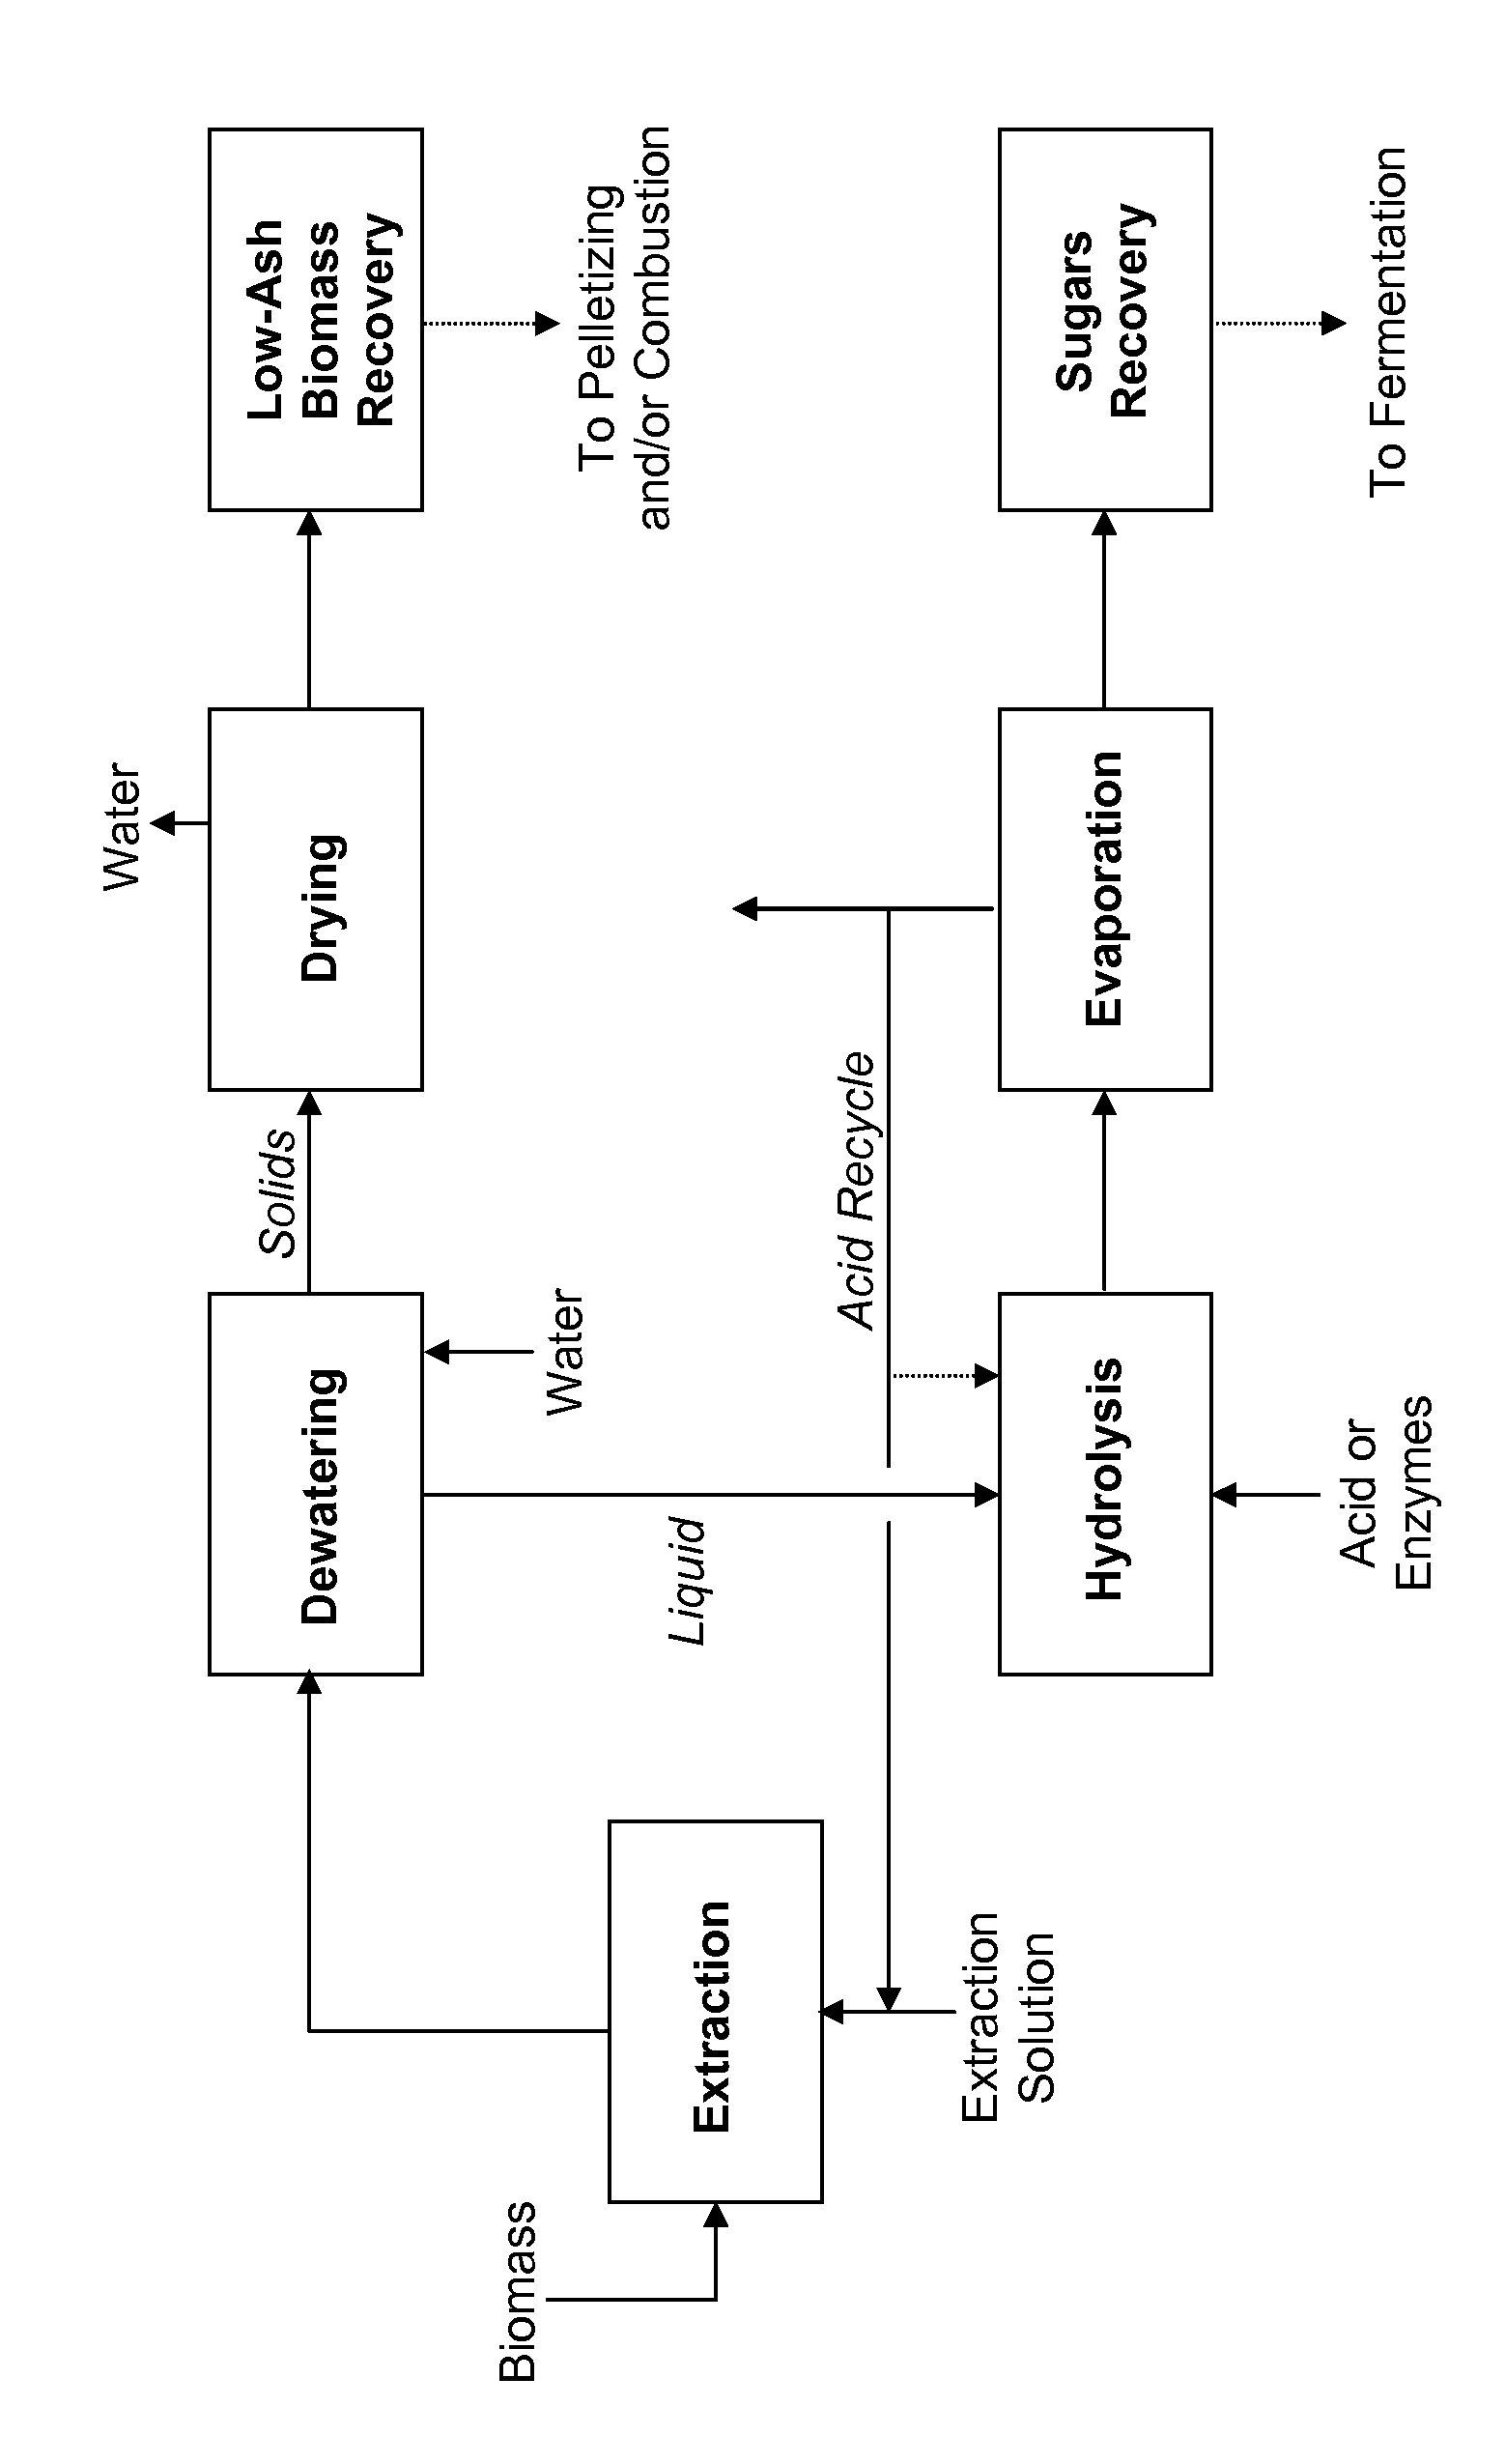 Processes for producing fermentable sugars and low-ash biomass for combustion or pellets